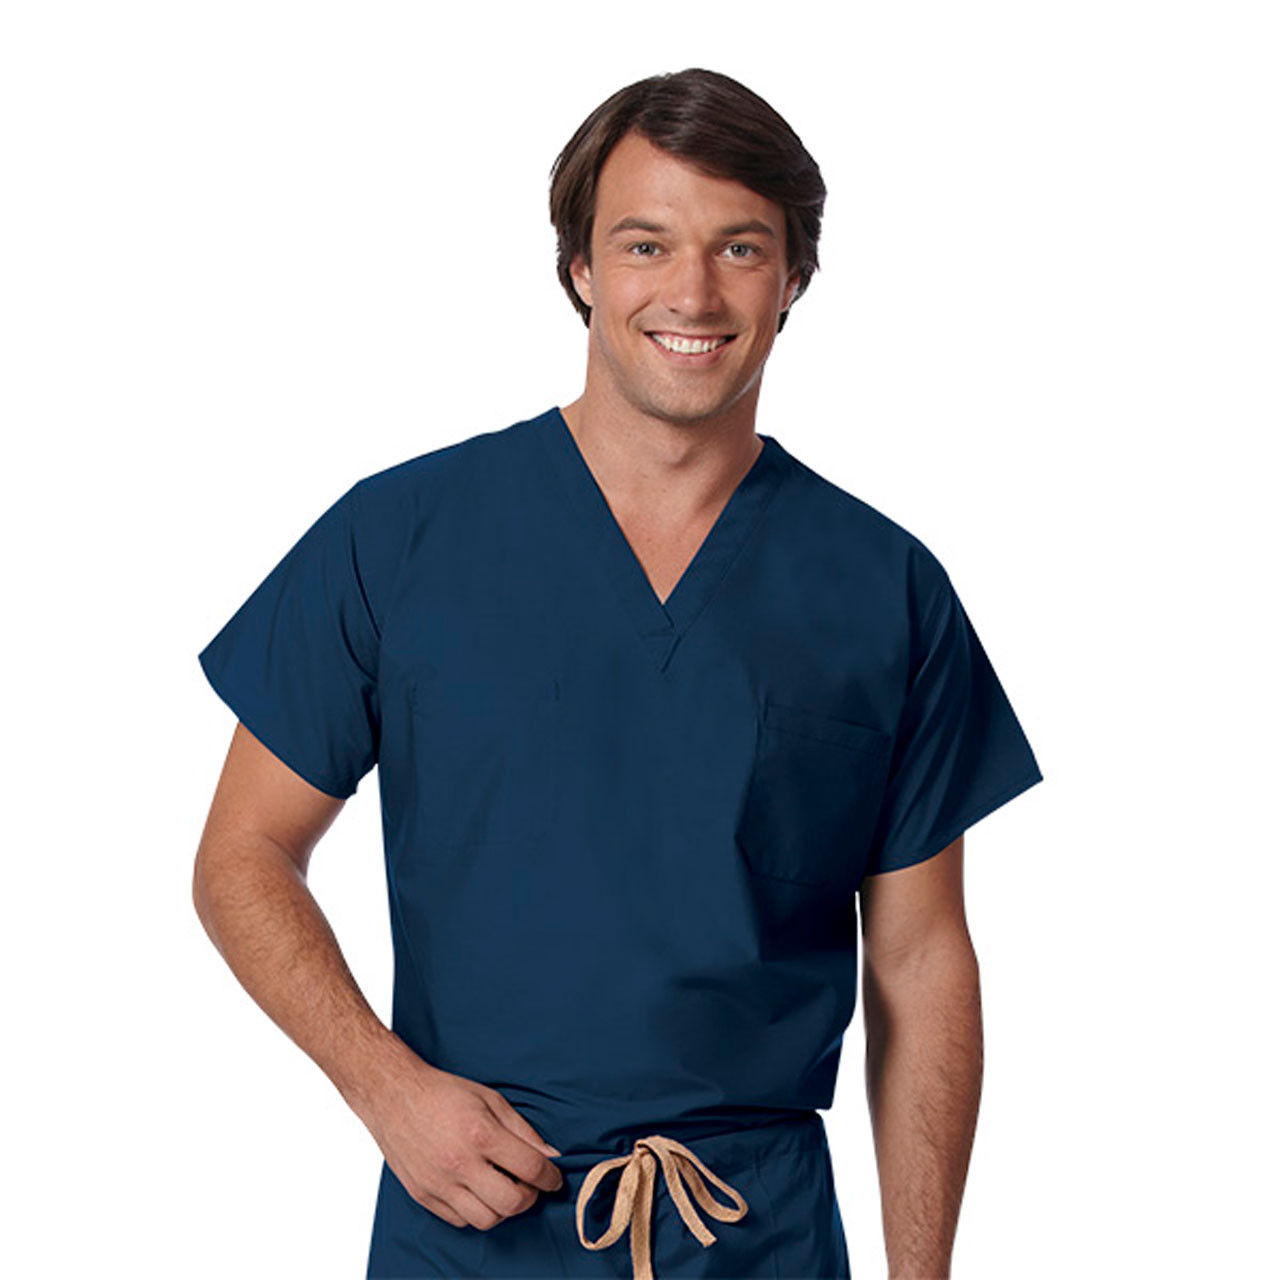 Does the navy surgical scrubs top feature a set-in sleeve?